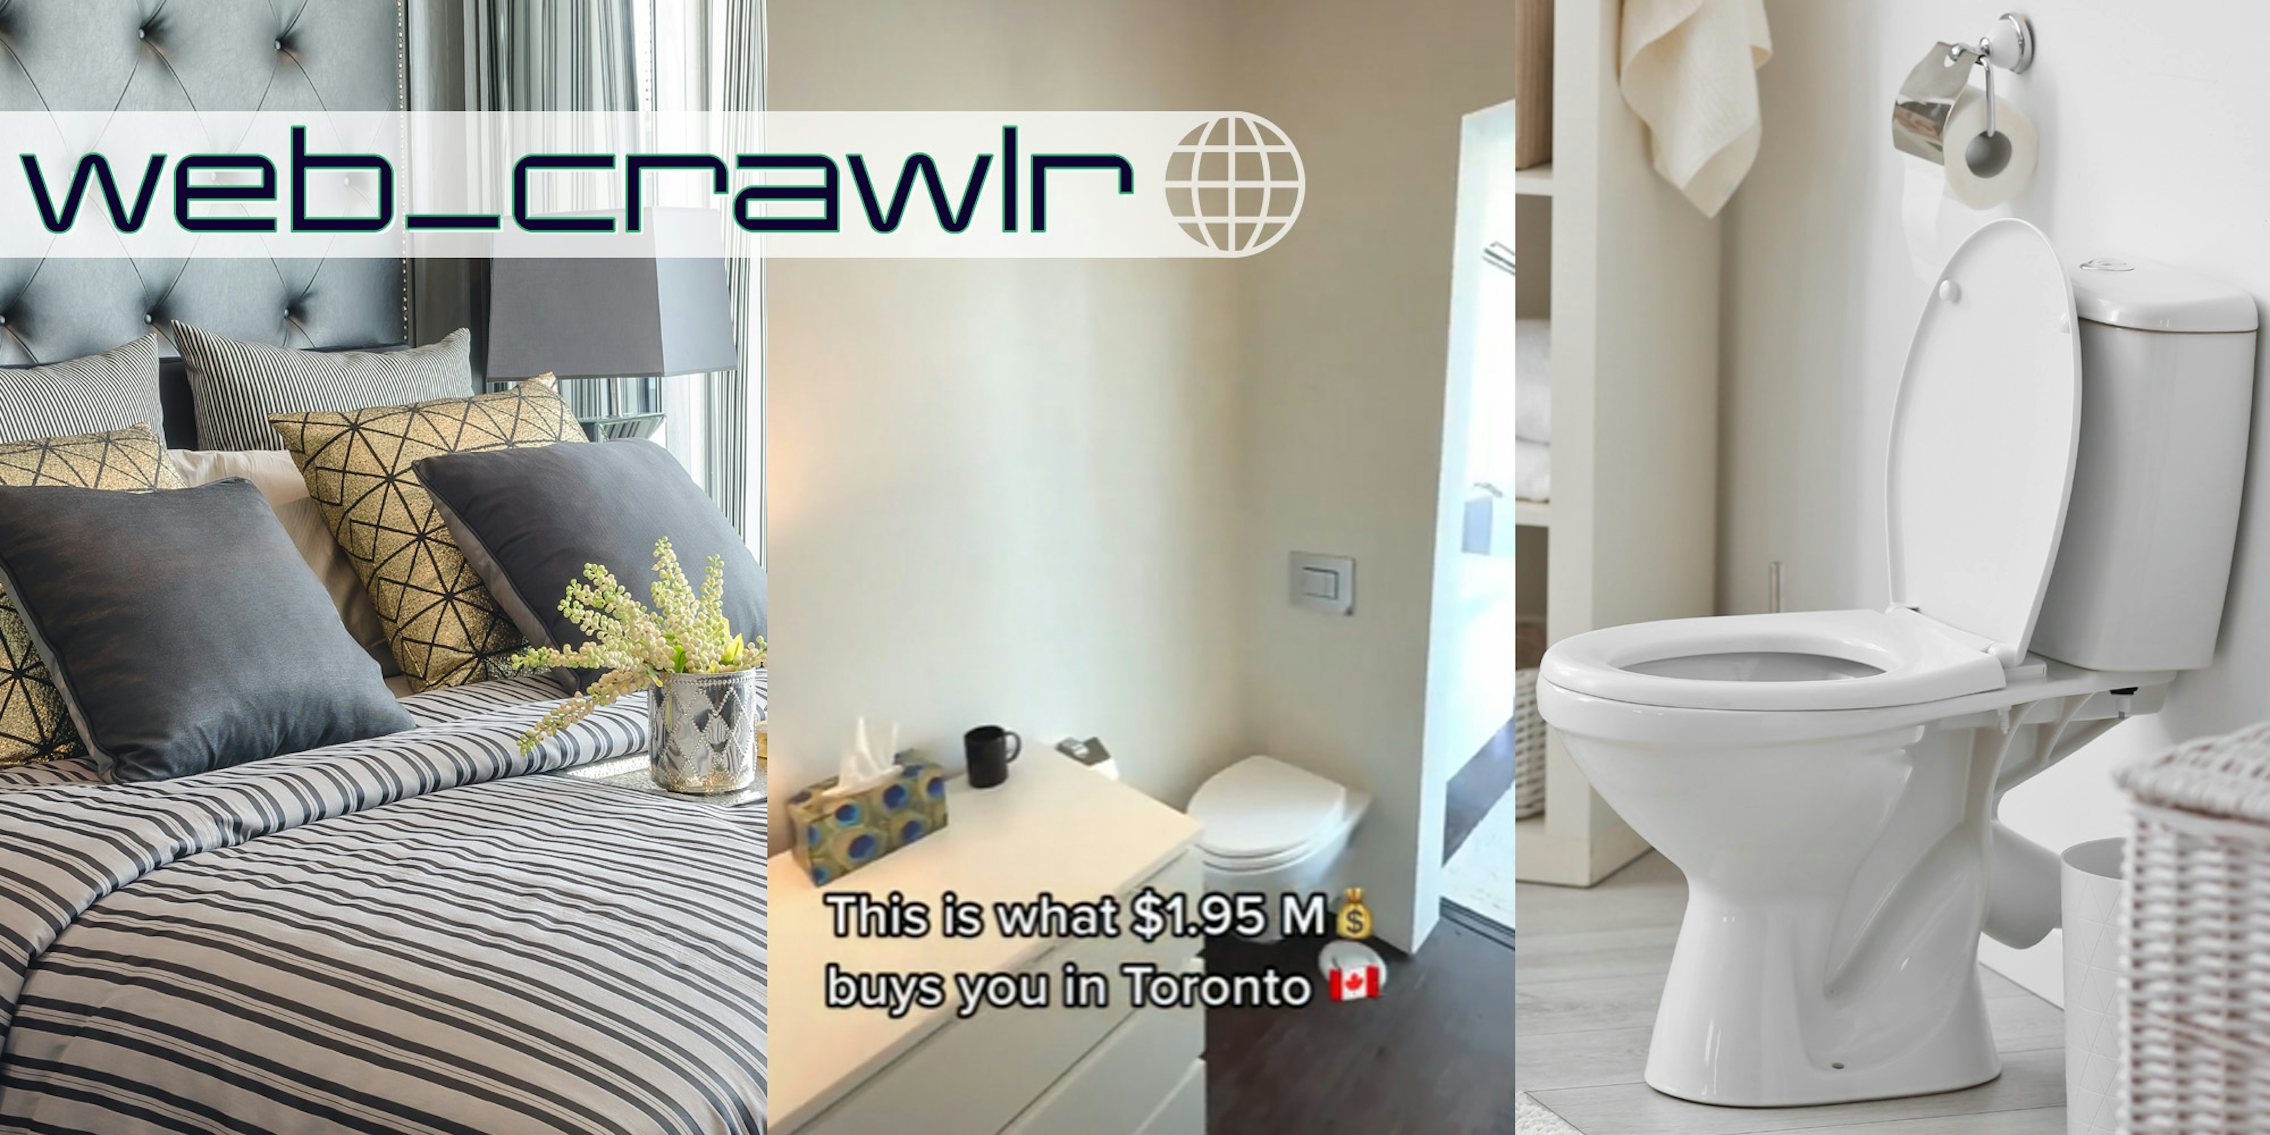 Three panels showing a bed (l), a screenshot from a TikTok showing a toilet in a bedroom (middle), and a toilet (r). The Daily Dot newsletter web_crawlr logo is in the top left corner.